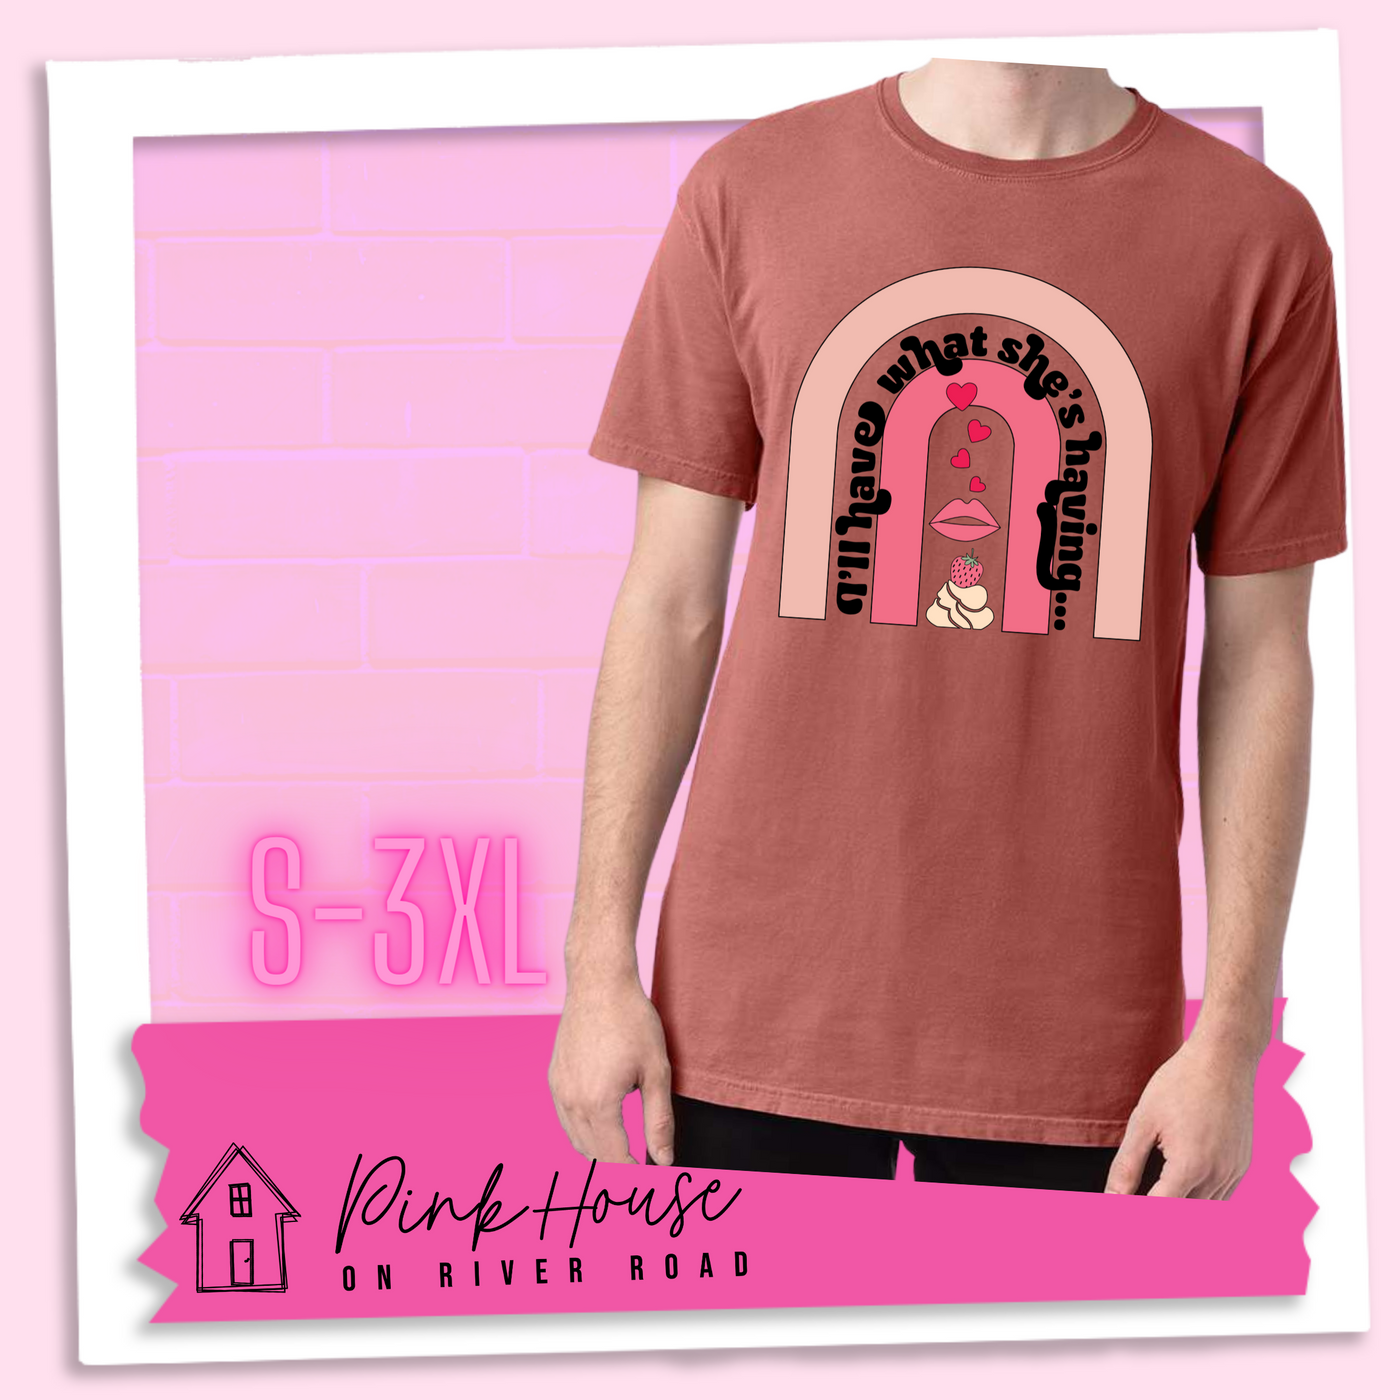 Nantucket Red tee with a graphic of a strawberry dessert and a set of lips with hearts, there is a pink arch going over the art. There is a retro font arched over the pink art that says "I'll have what she's having..." in black with another arch above that in light pink.